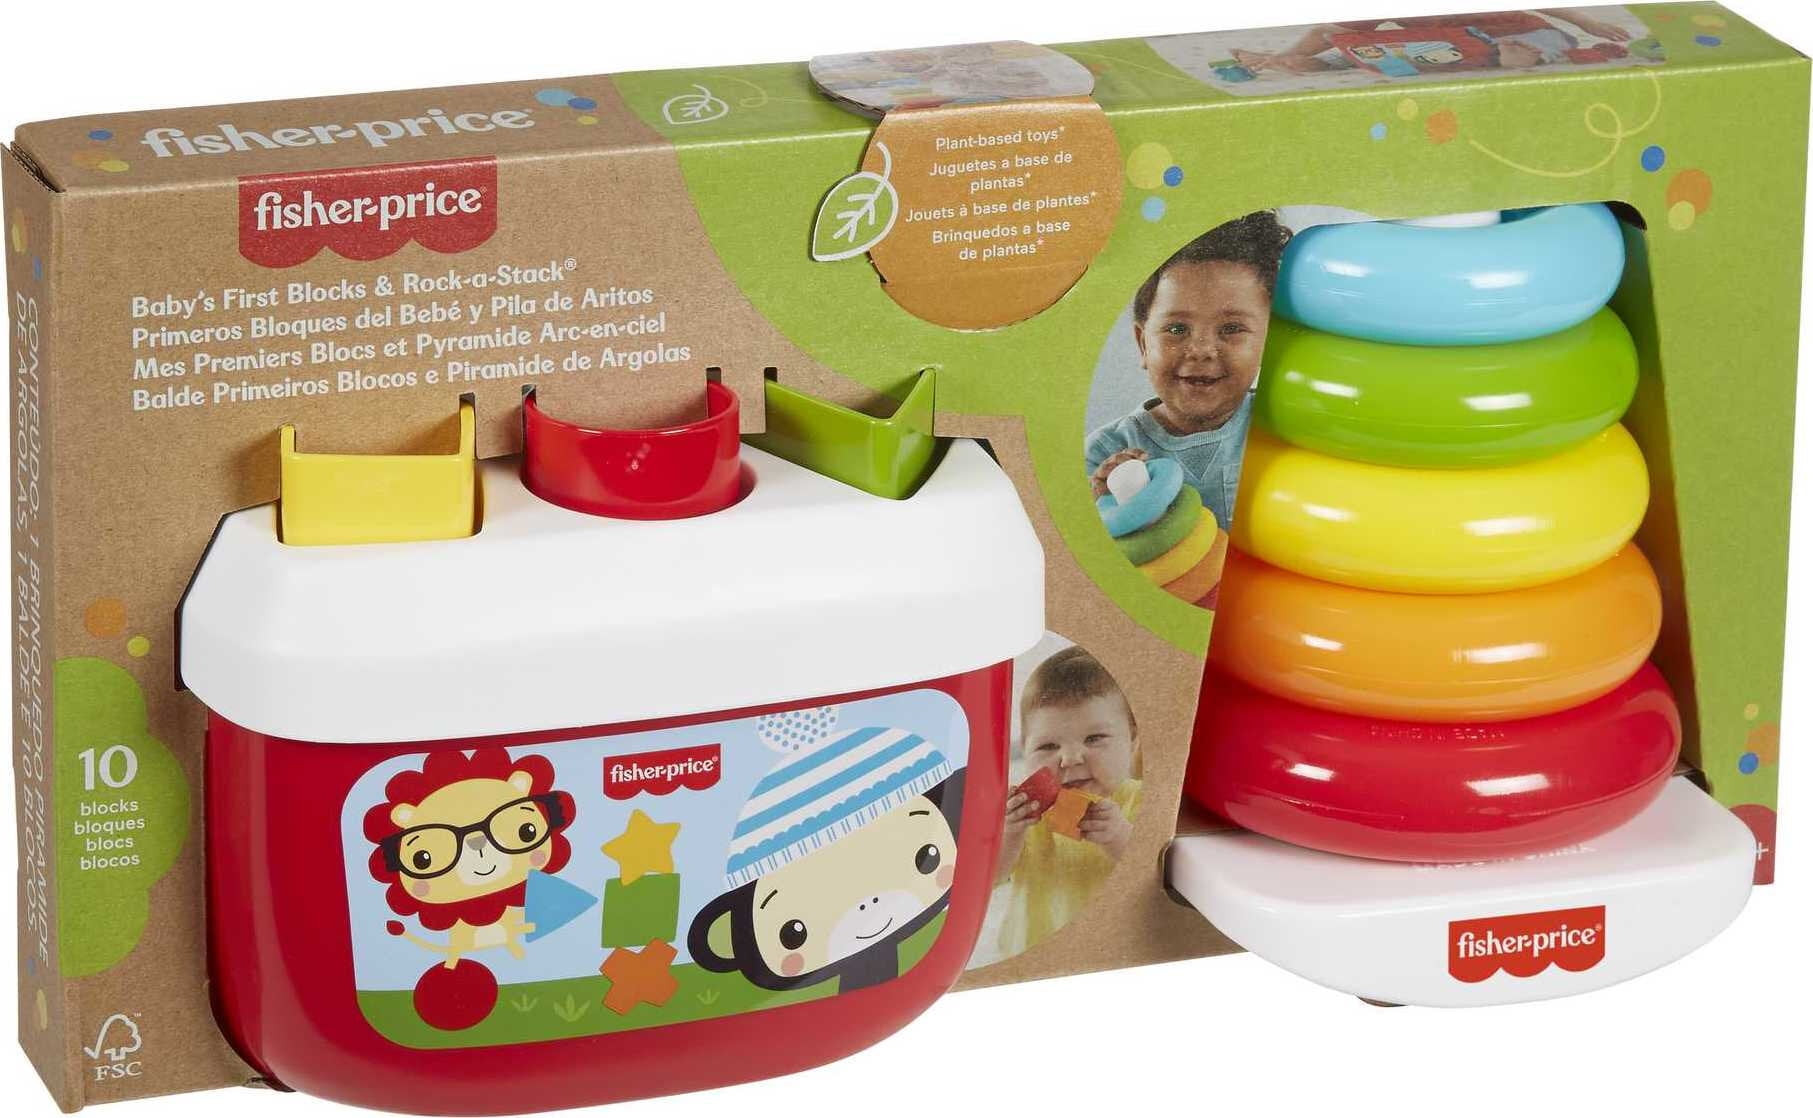 hierba persecucion Un fiel Fisher-Price Baby's First Blocks & Rock-a-Stack Infant Toy Gift Set Made  From Plant-Based Materials - Walmart.com